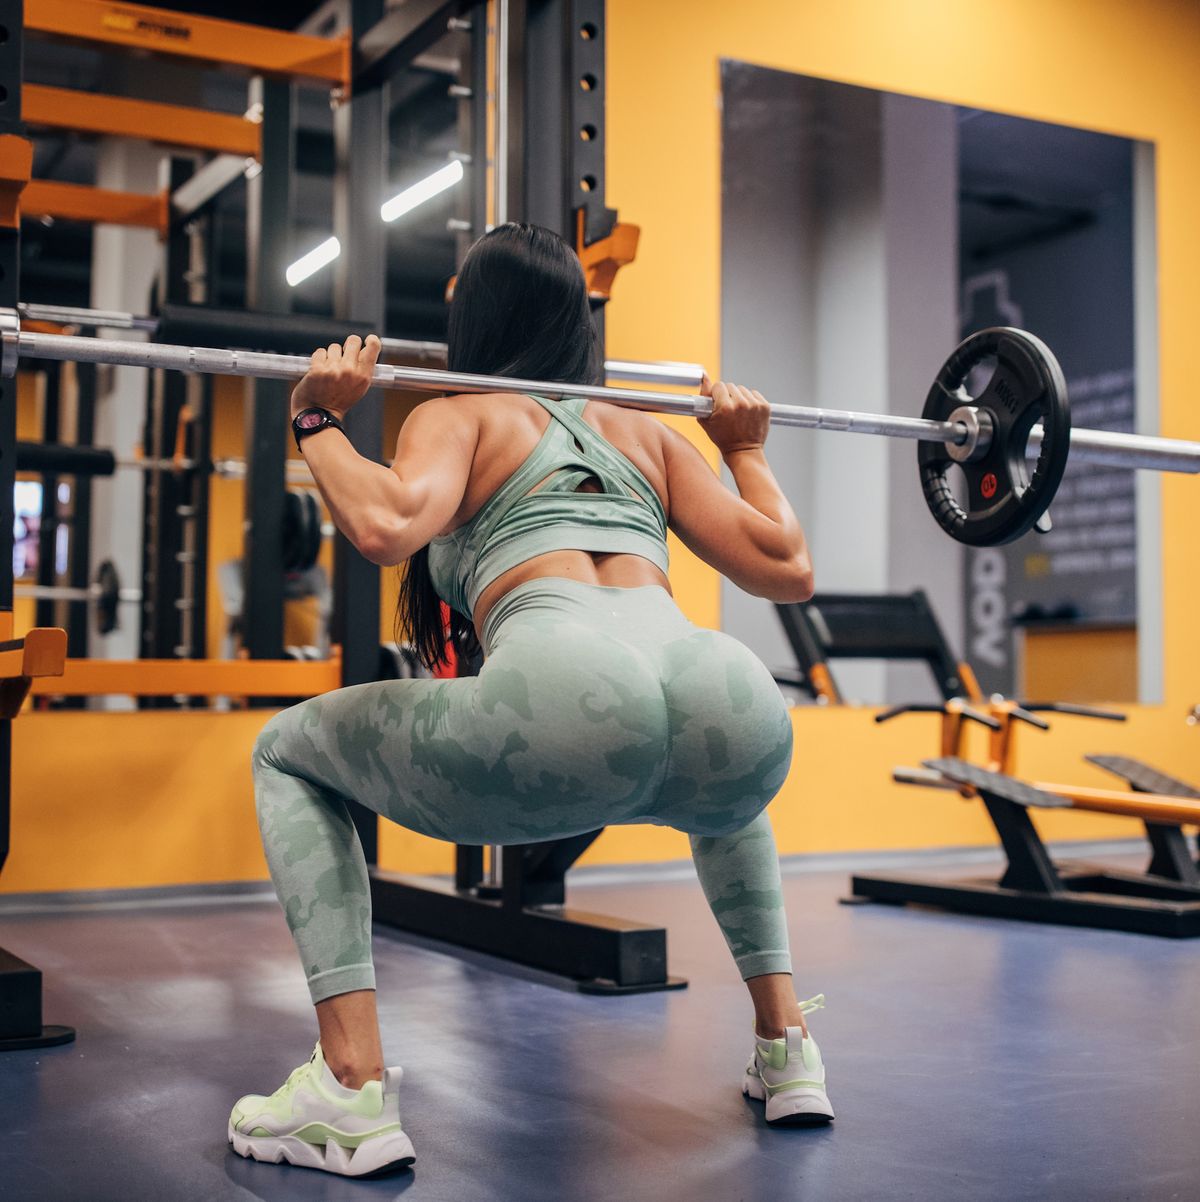 How To Do Squats For Butt Muscles & Get A Glute Workout